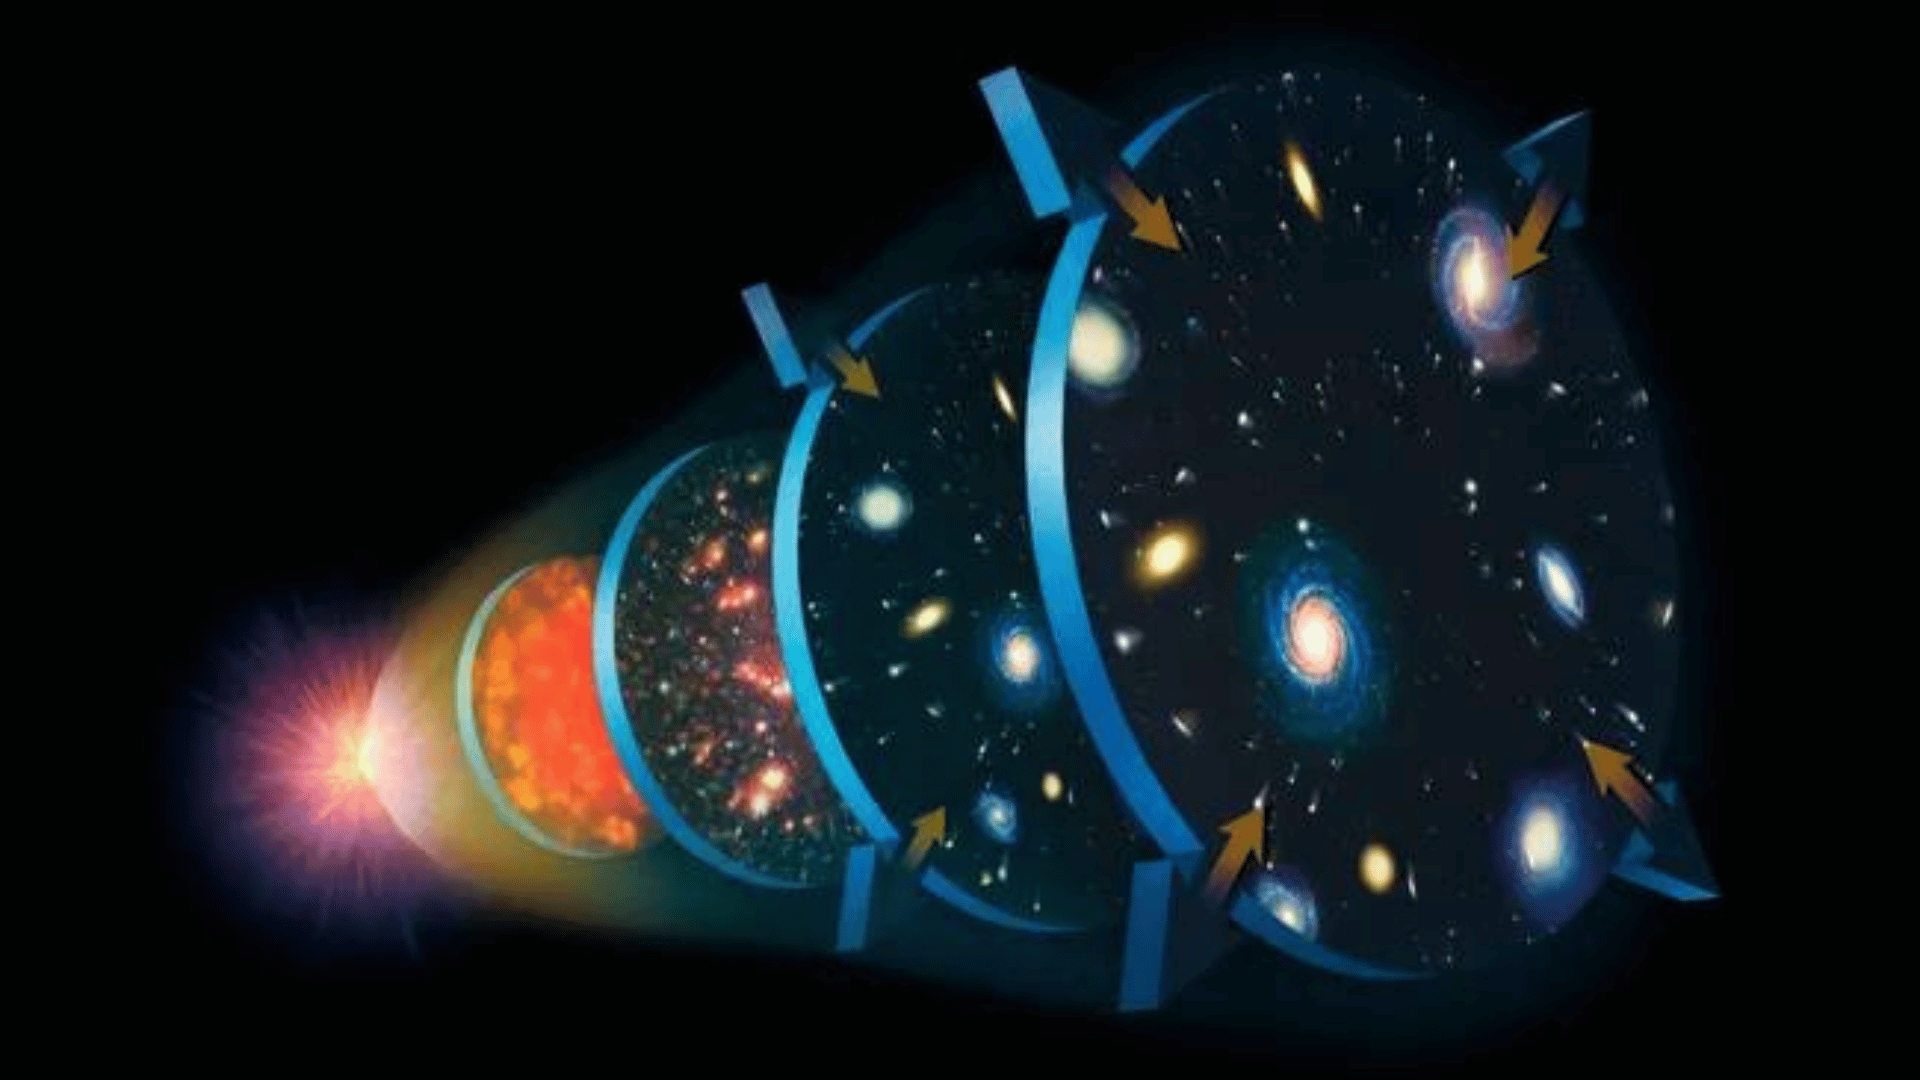 Illustration of the expansion of the Universe. Illustration of the expansion of the Universe. (Image credit: Mark Garlick:Science Photo Library via Getty Images)